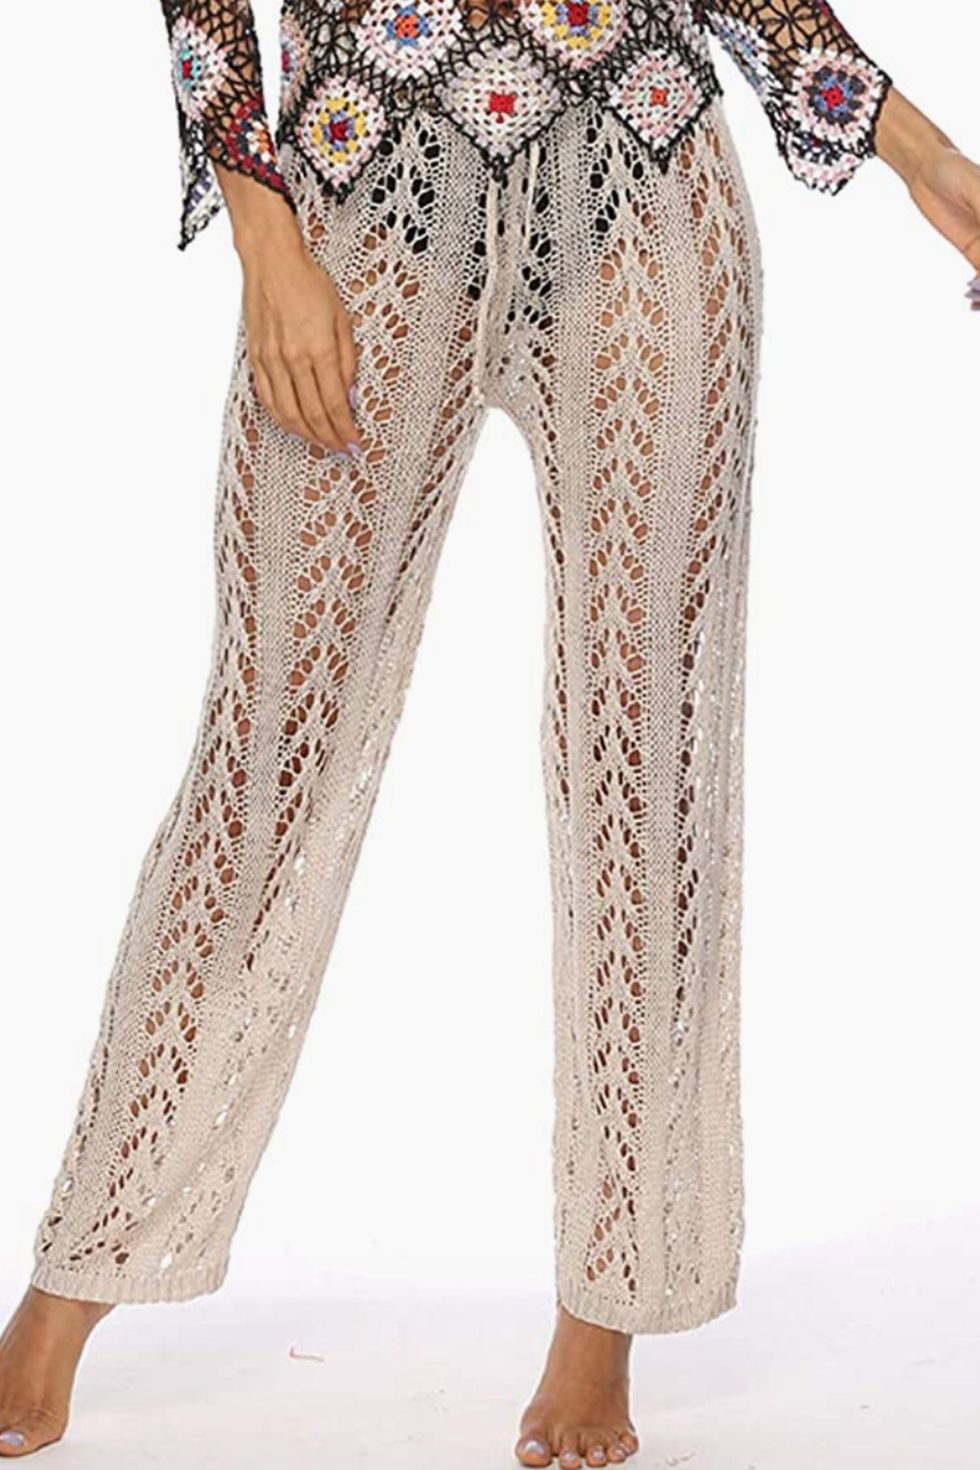 20 Chic Beach Pants for Women - Beach Pants To Try This Summer